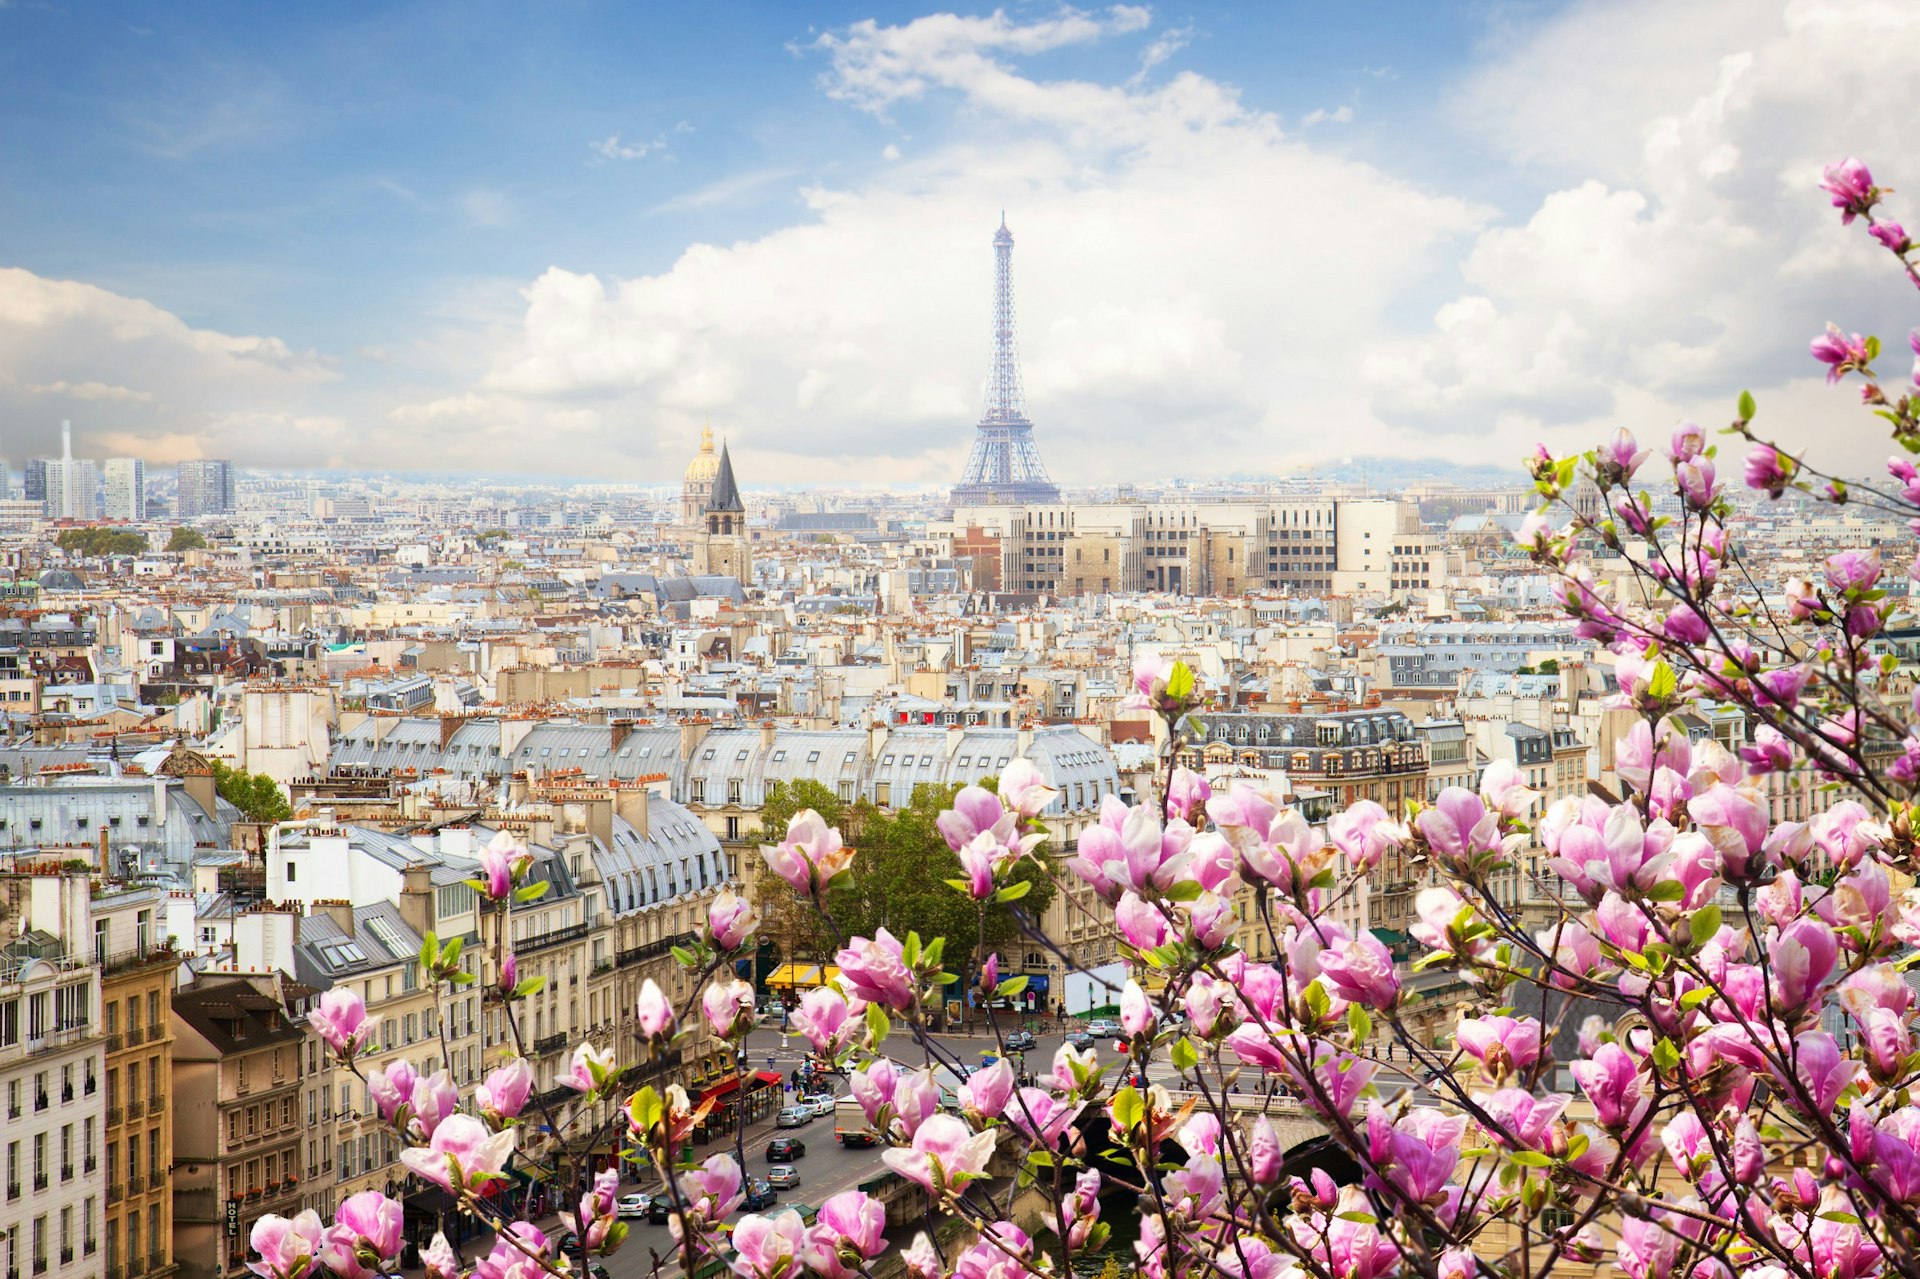 Rooftops of Paris with the iconic metal pointed tower that is the Eiffel Tower in the background. A magnolia is in bloom in the foreground, with beautiful white and pink buds.